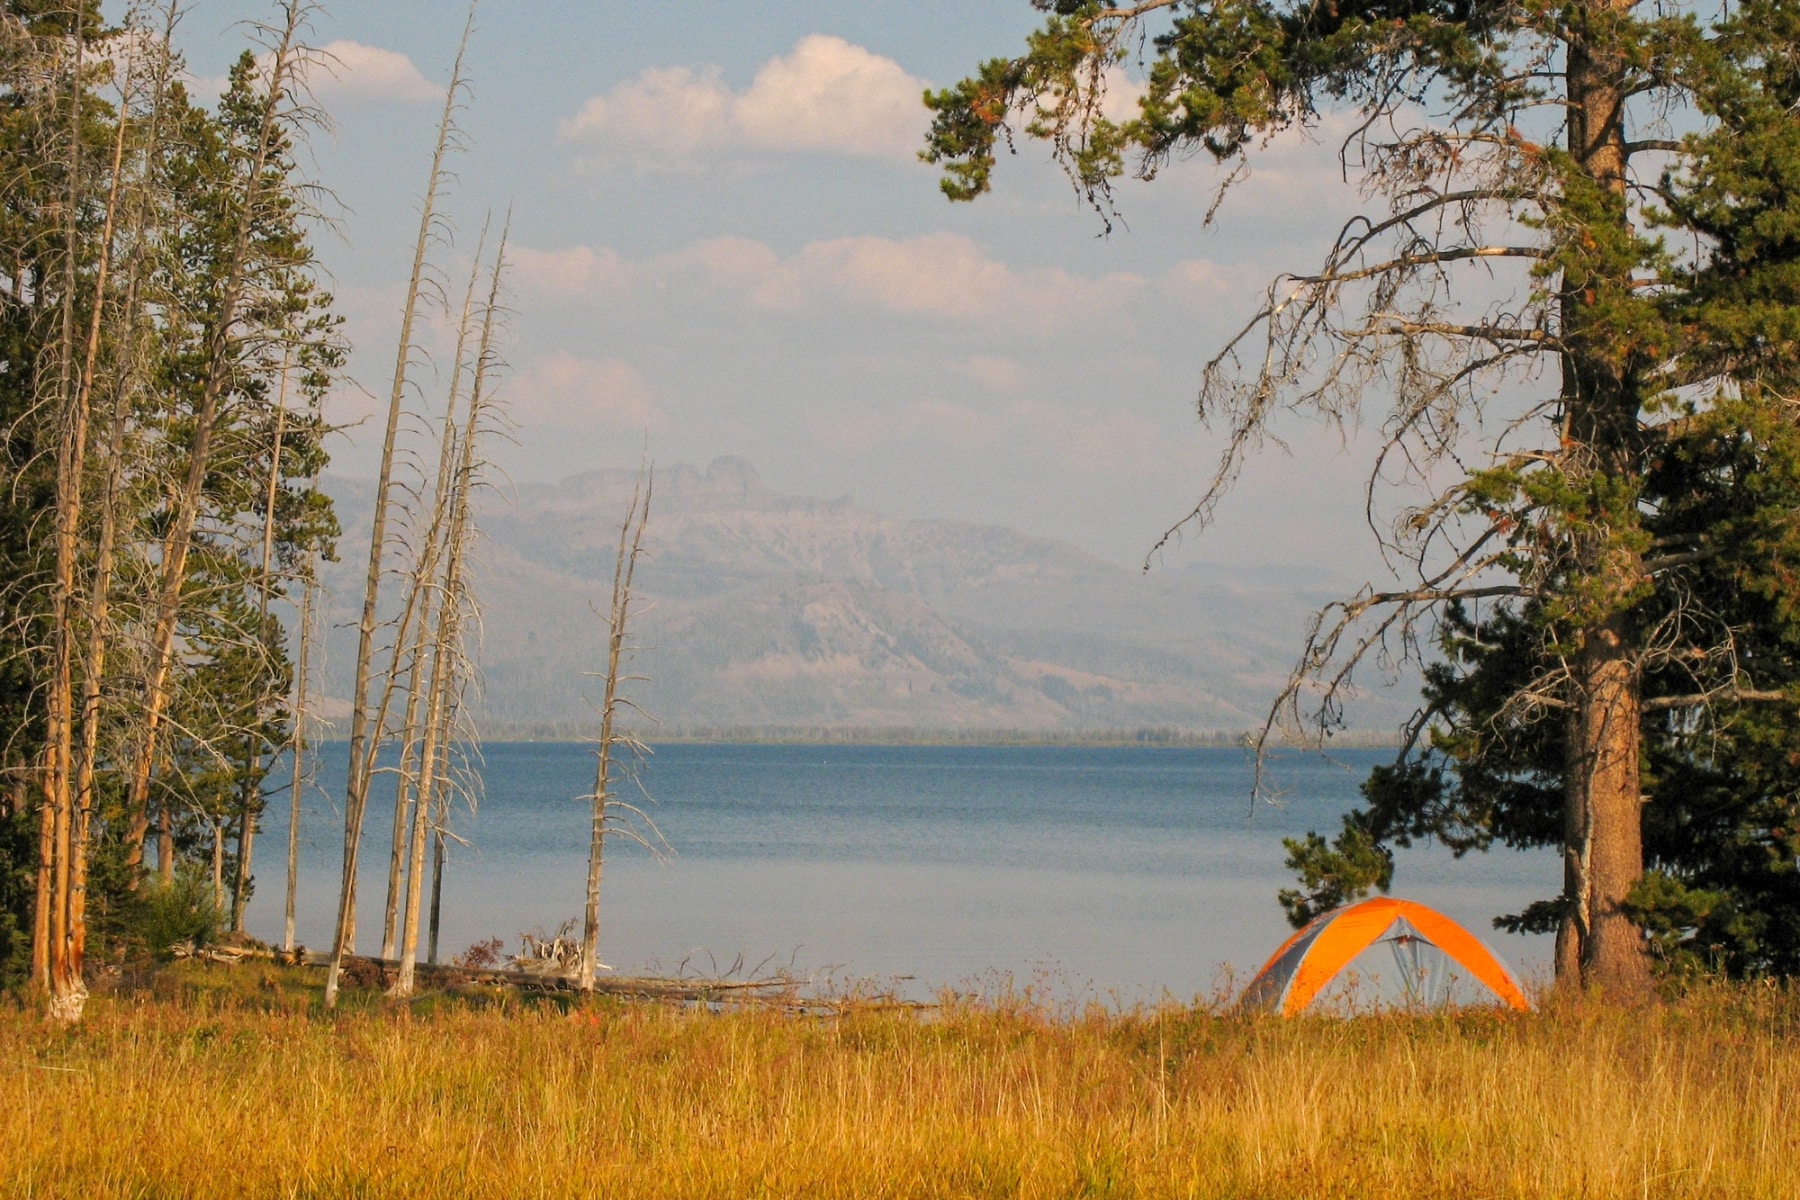 Campsite in Yellowstone in the fall, Camping is a big topic in the 7 principles of Leave No Trace